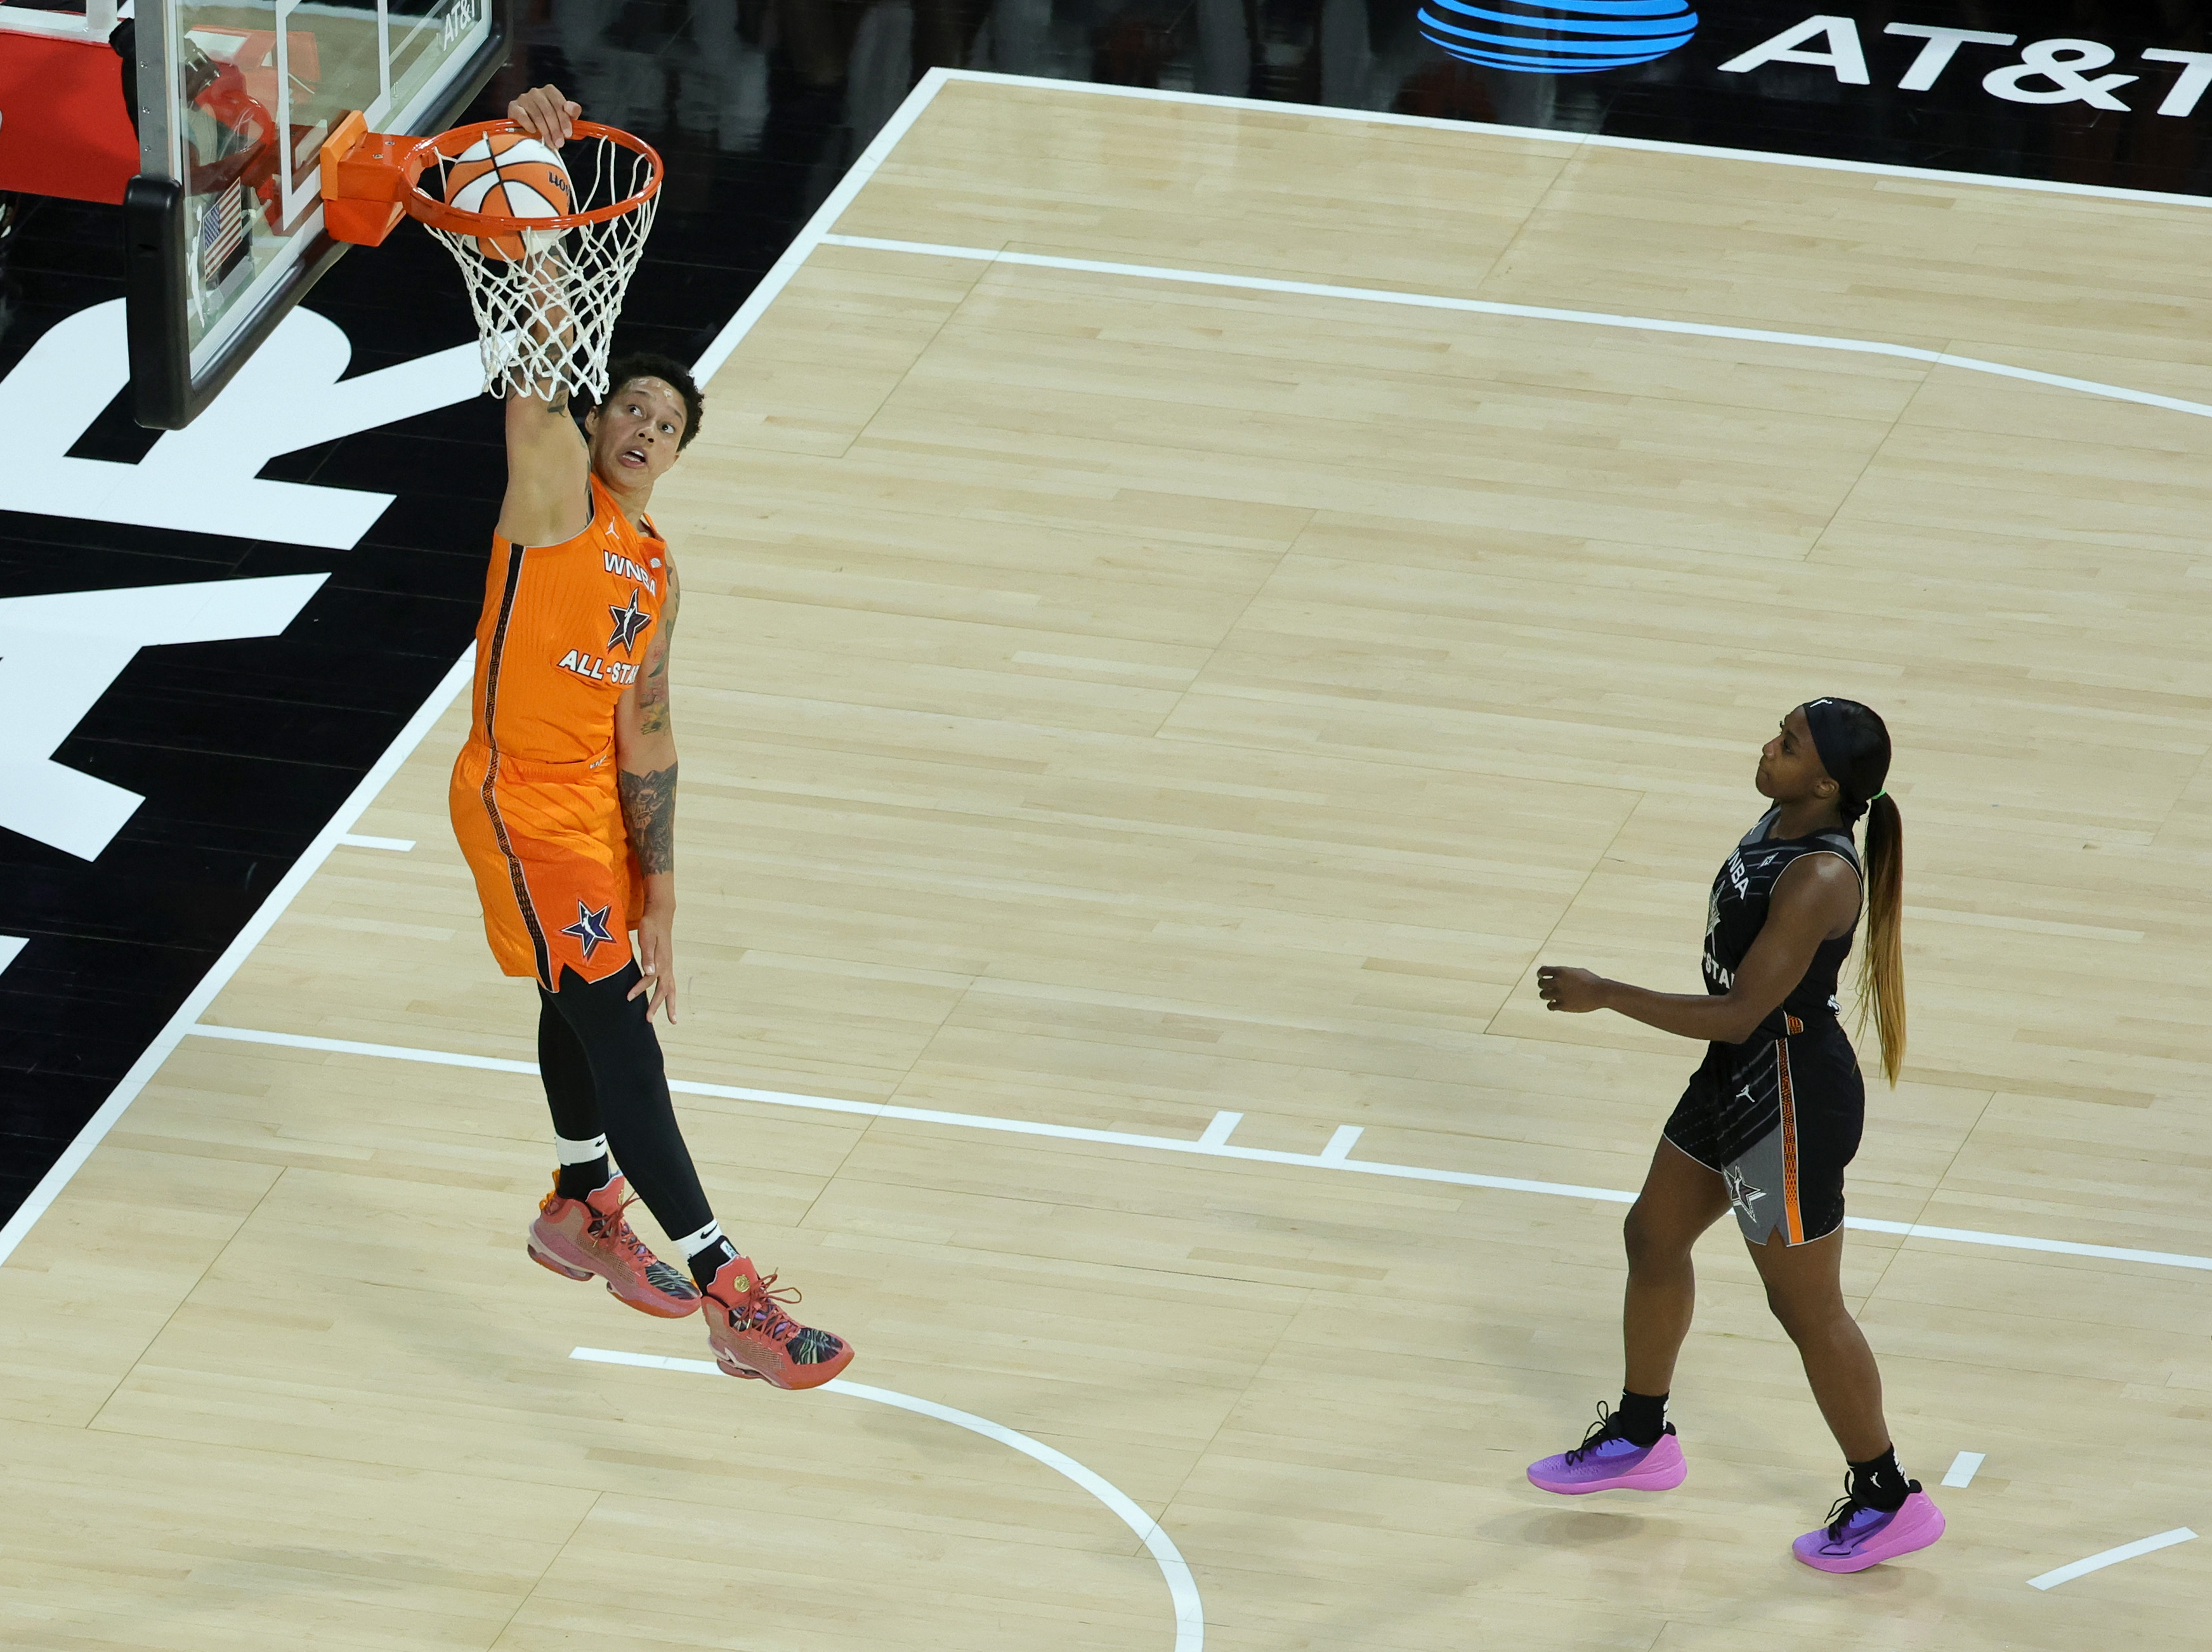 This Year's WNBA All-Star Game Featured A Special Jersey Dedicated To  Brittney Griner